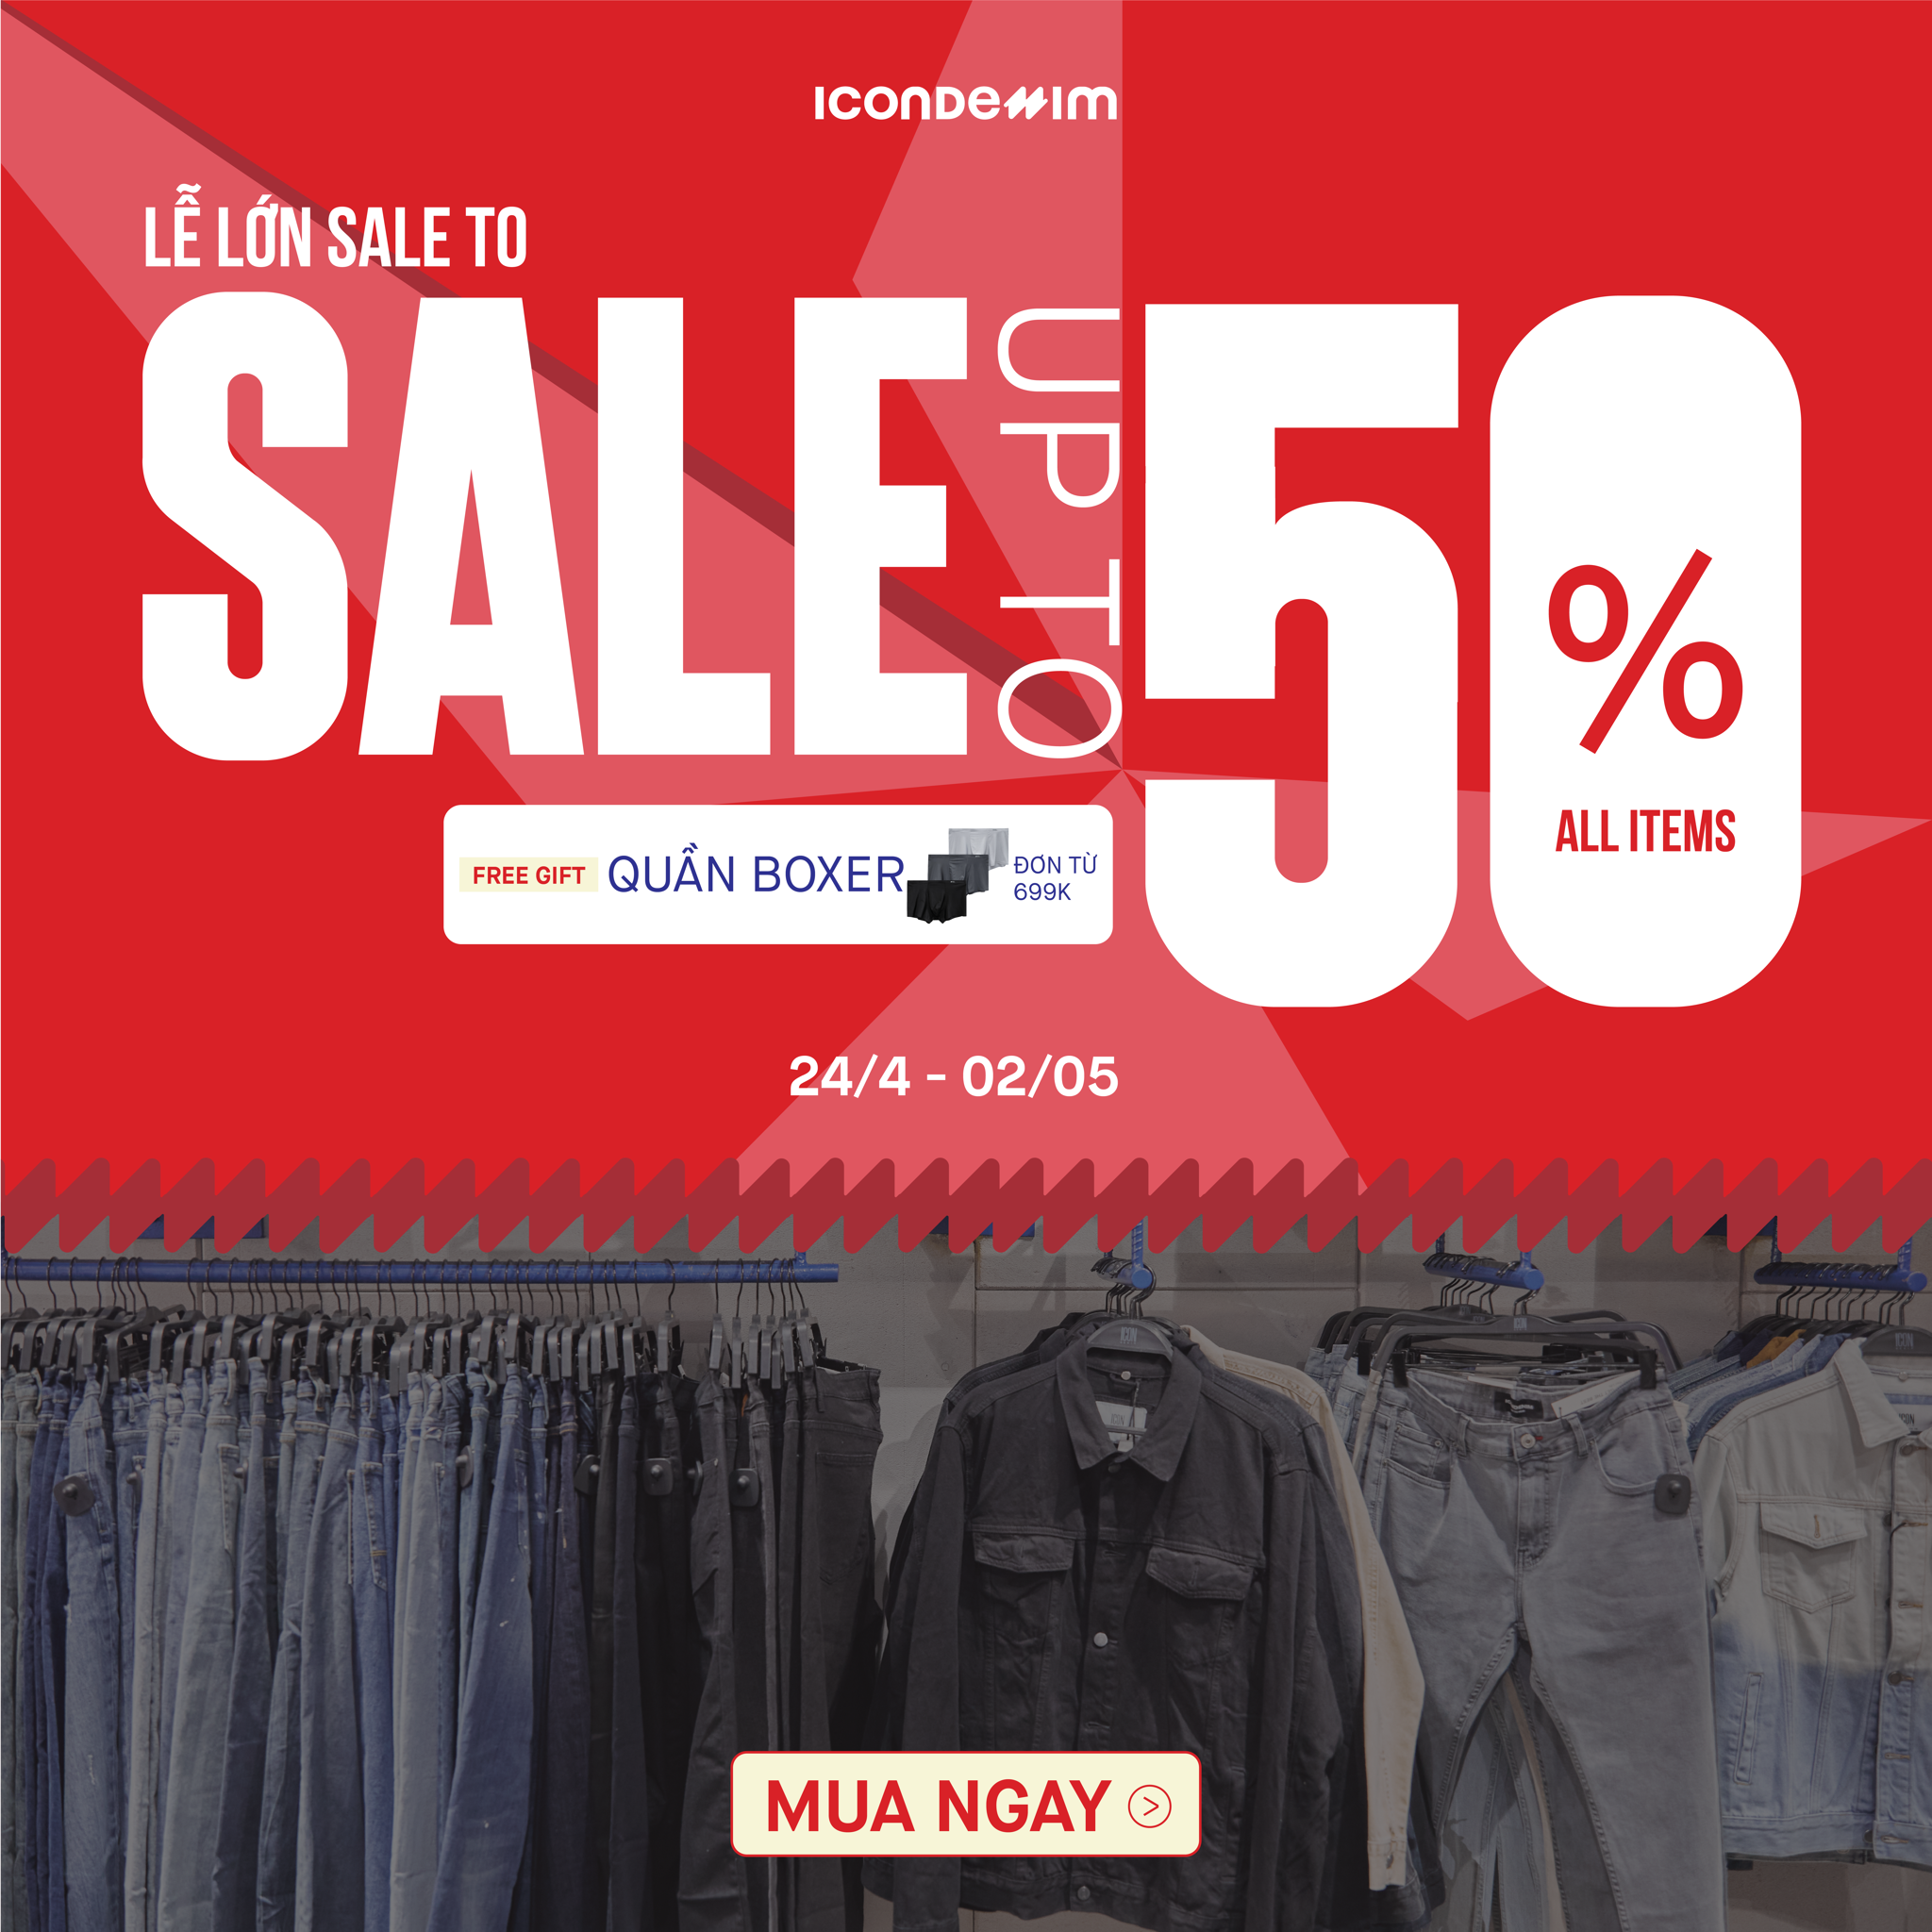 MỪNG LỄ SALE UP TO 50%